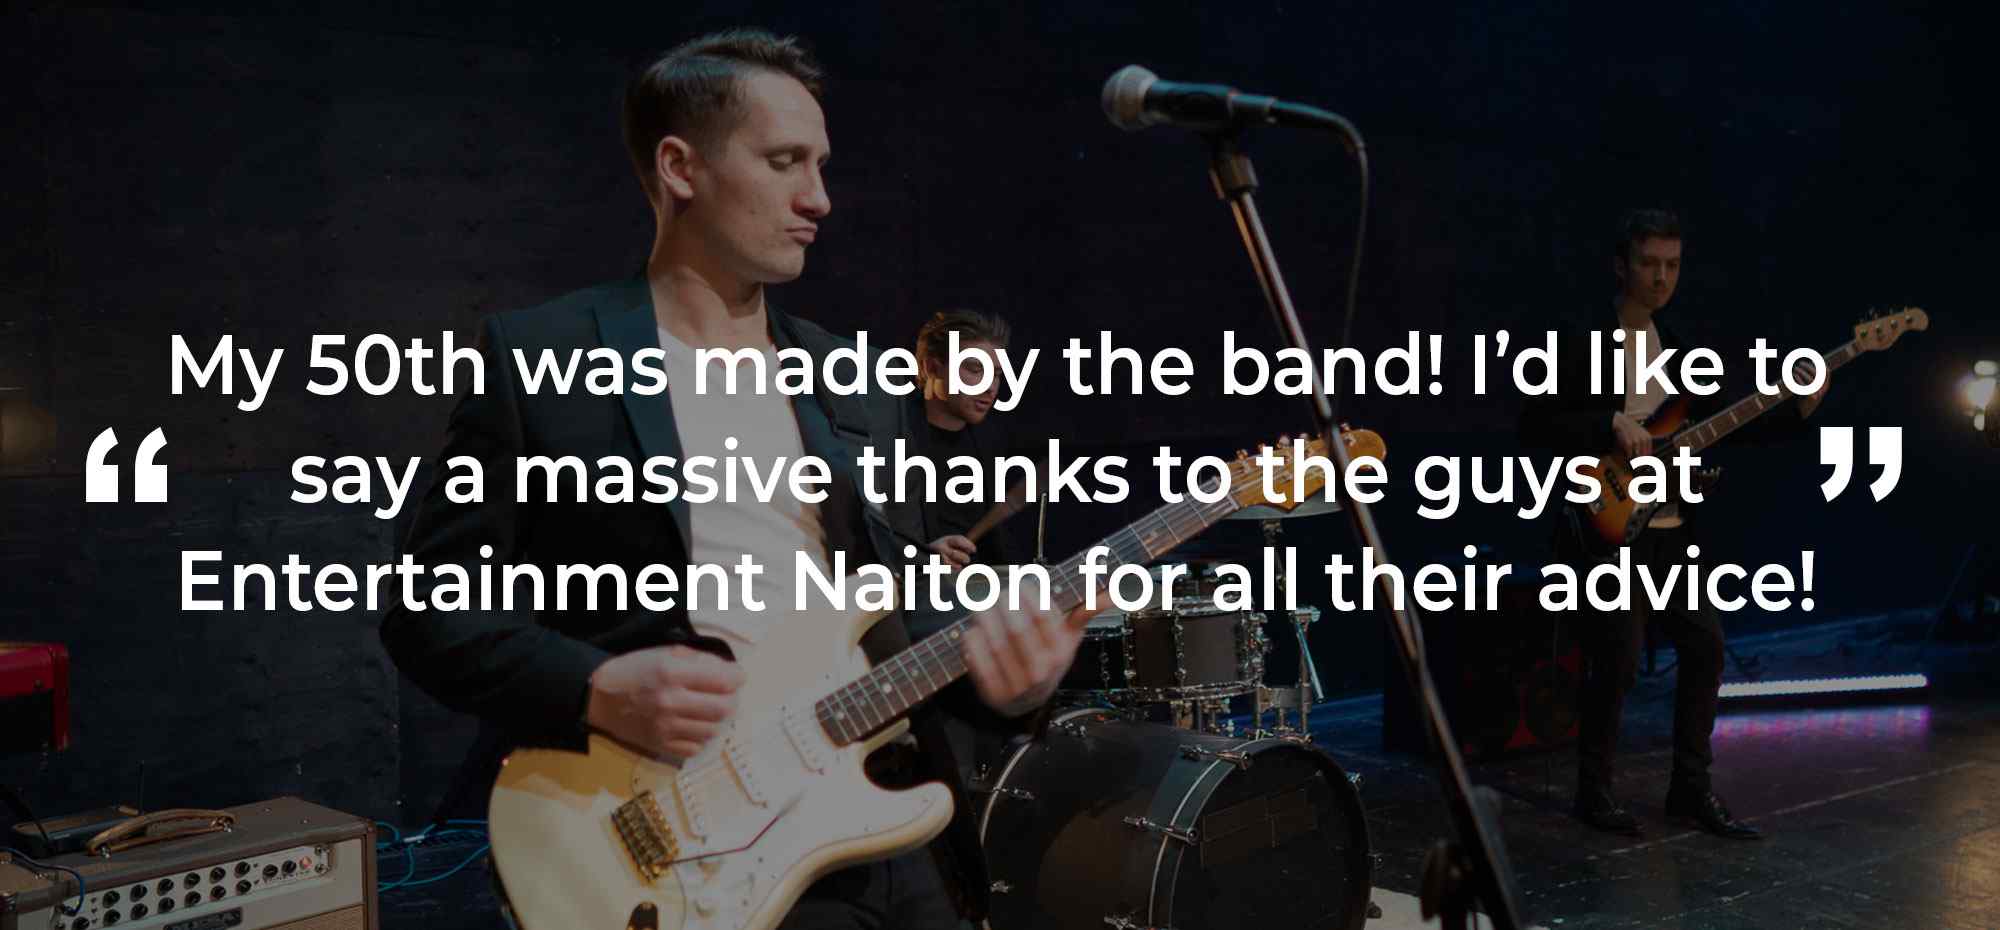 Client Review of a Party Band Surrey